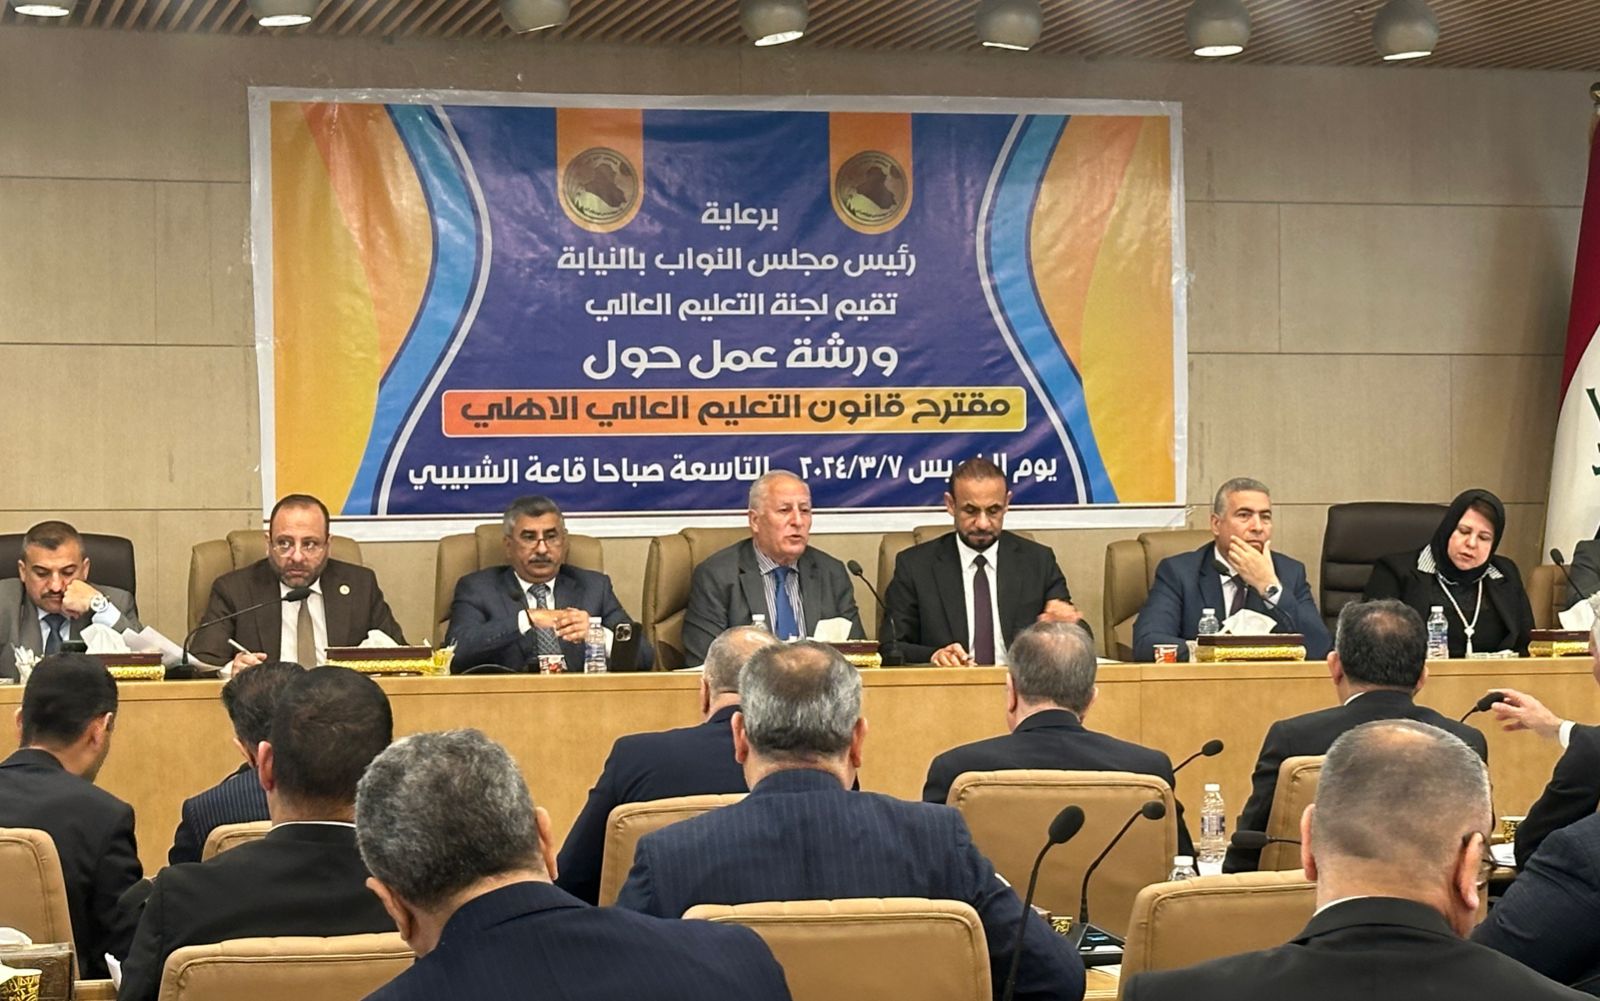 Private institutions propose amendments to the Iraqi Education Law